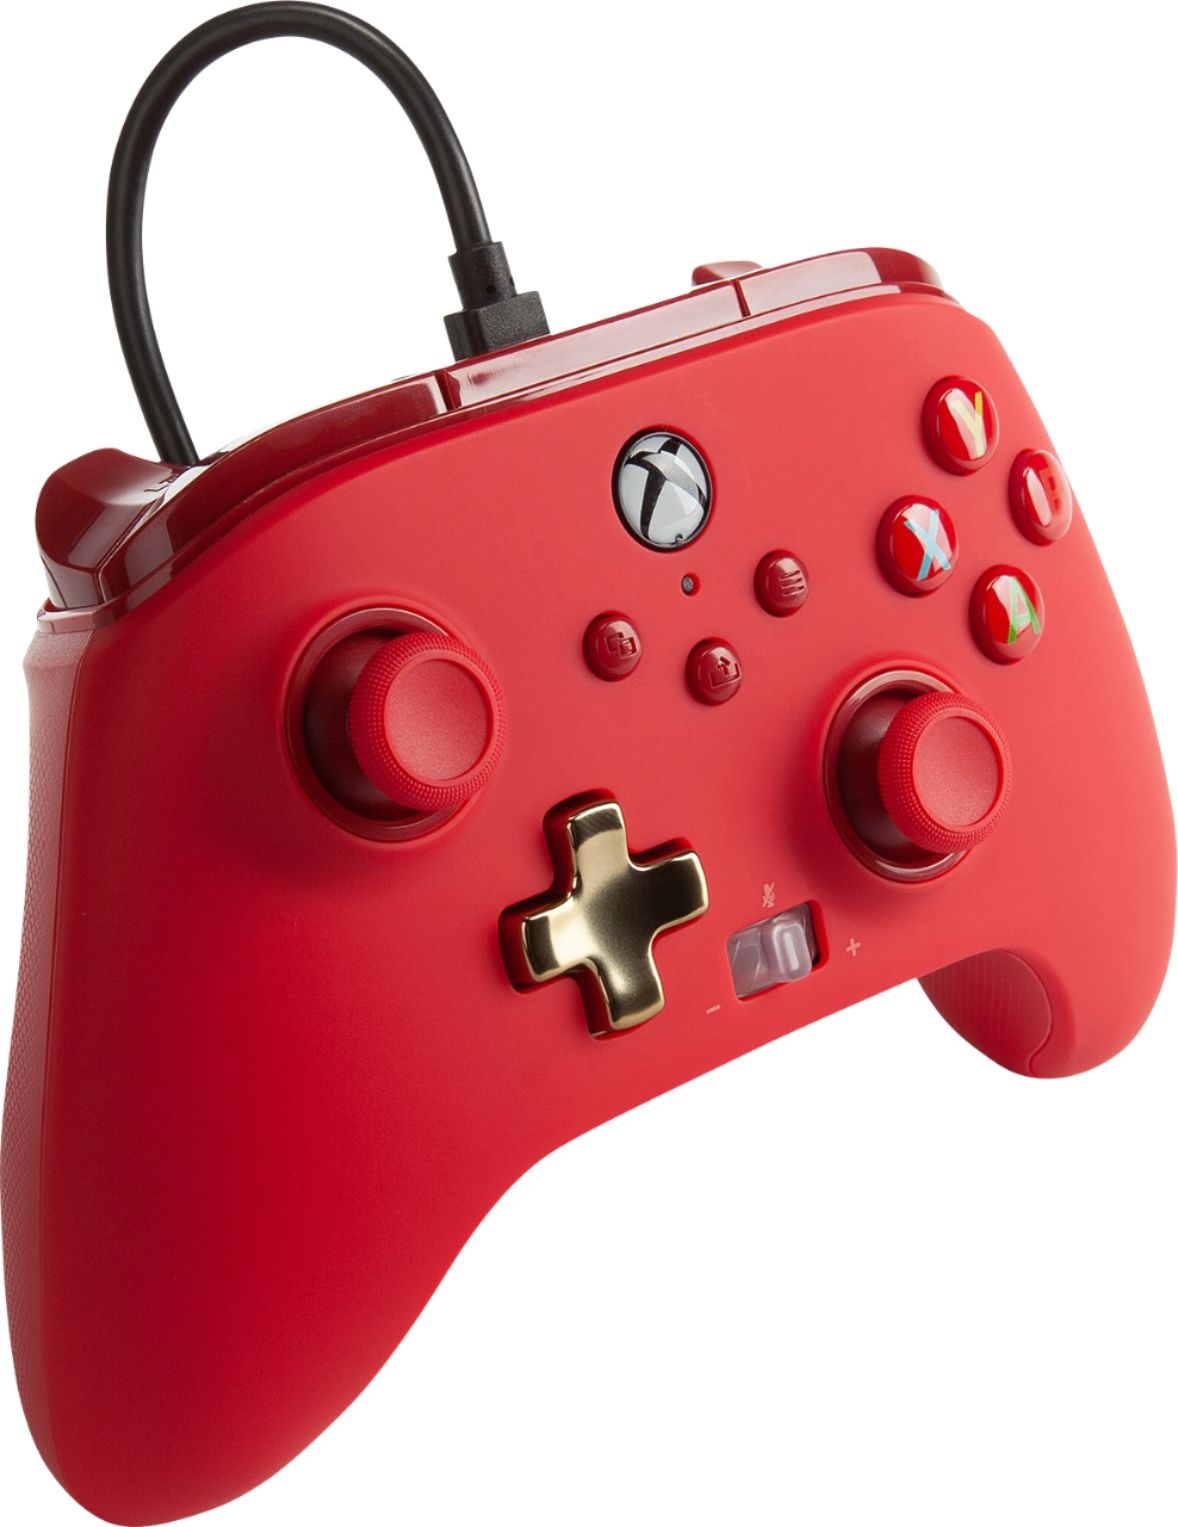 Angle View: PowerA Enhanced Wired Controller for Xbox Series X|S - Red